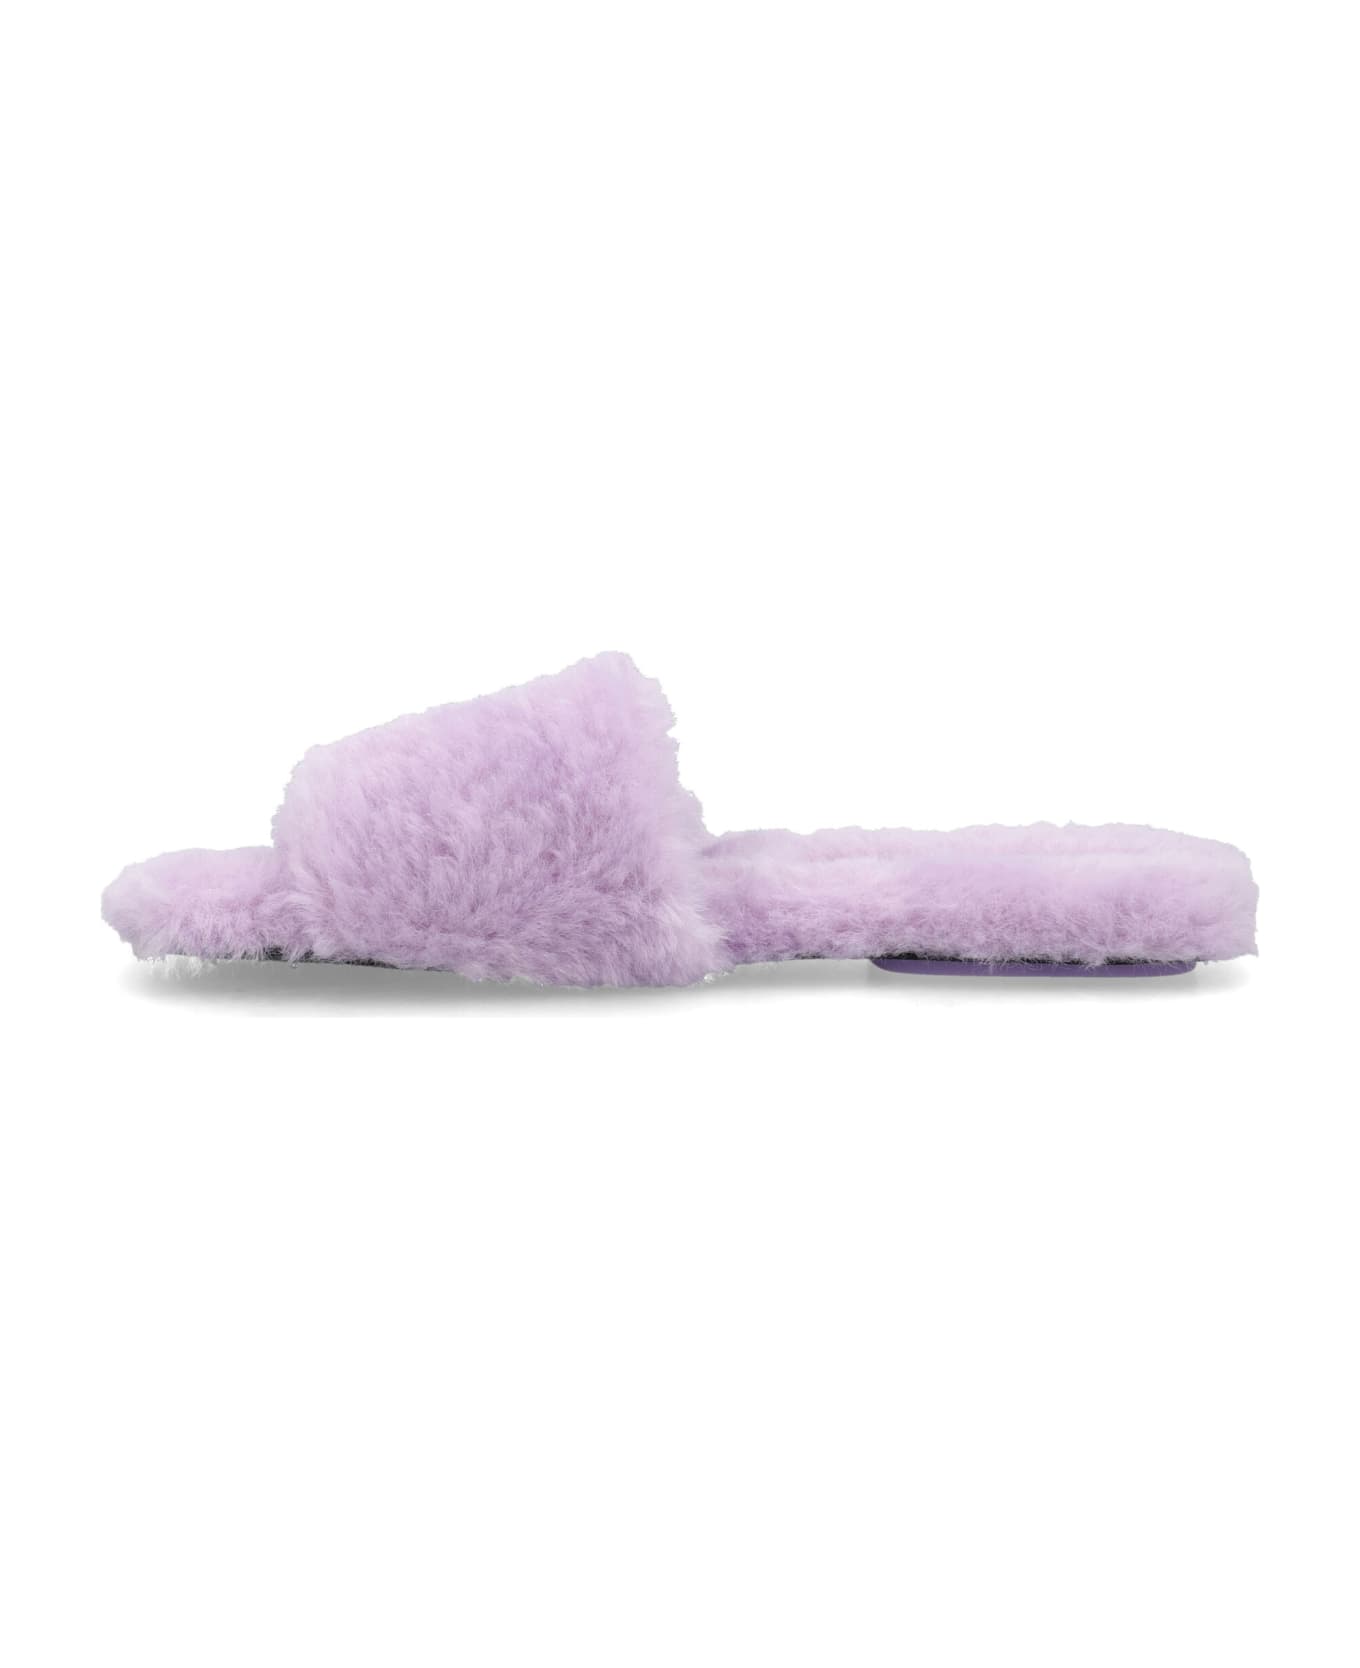 Marc Jacobs The Terry Slide - LAVANDER サンダル